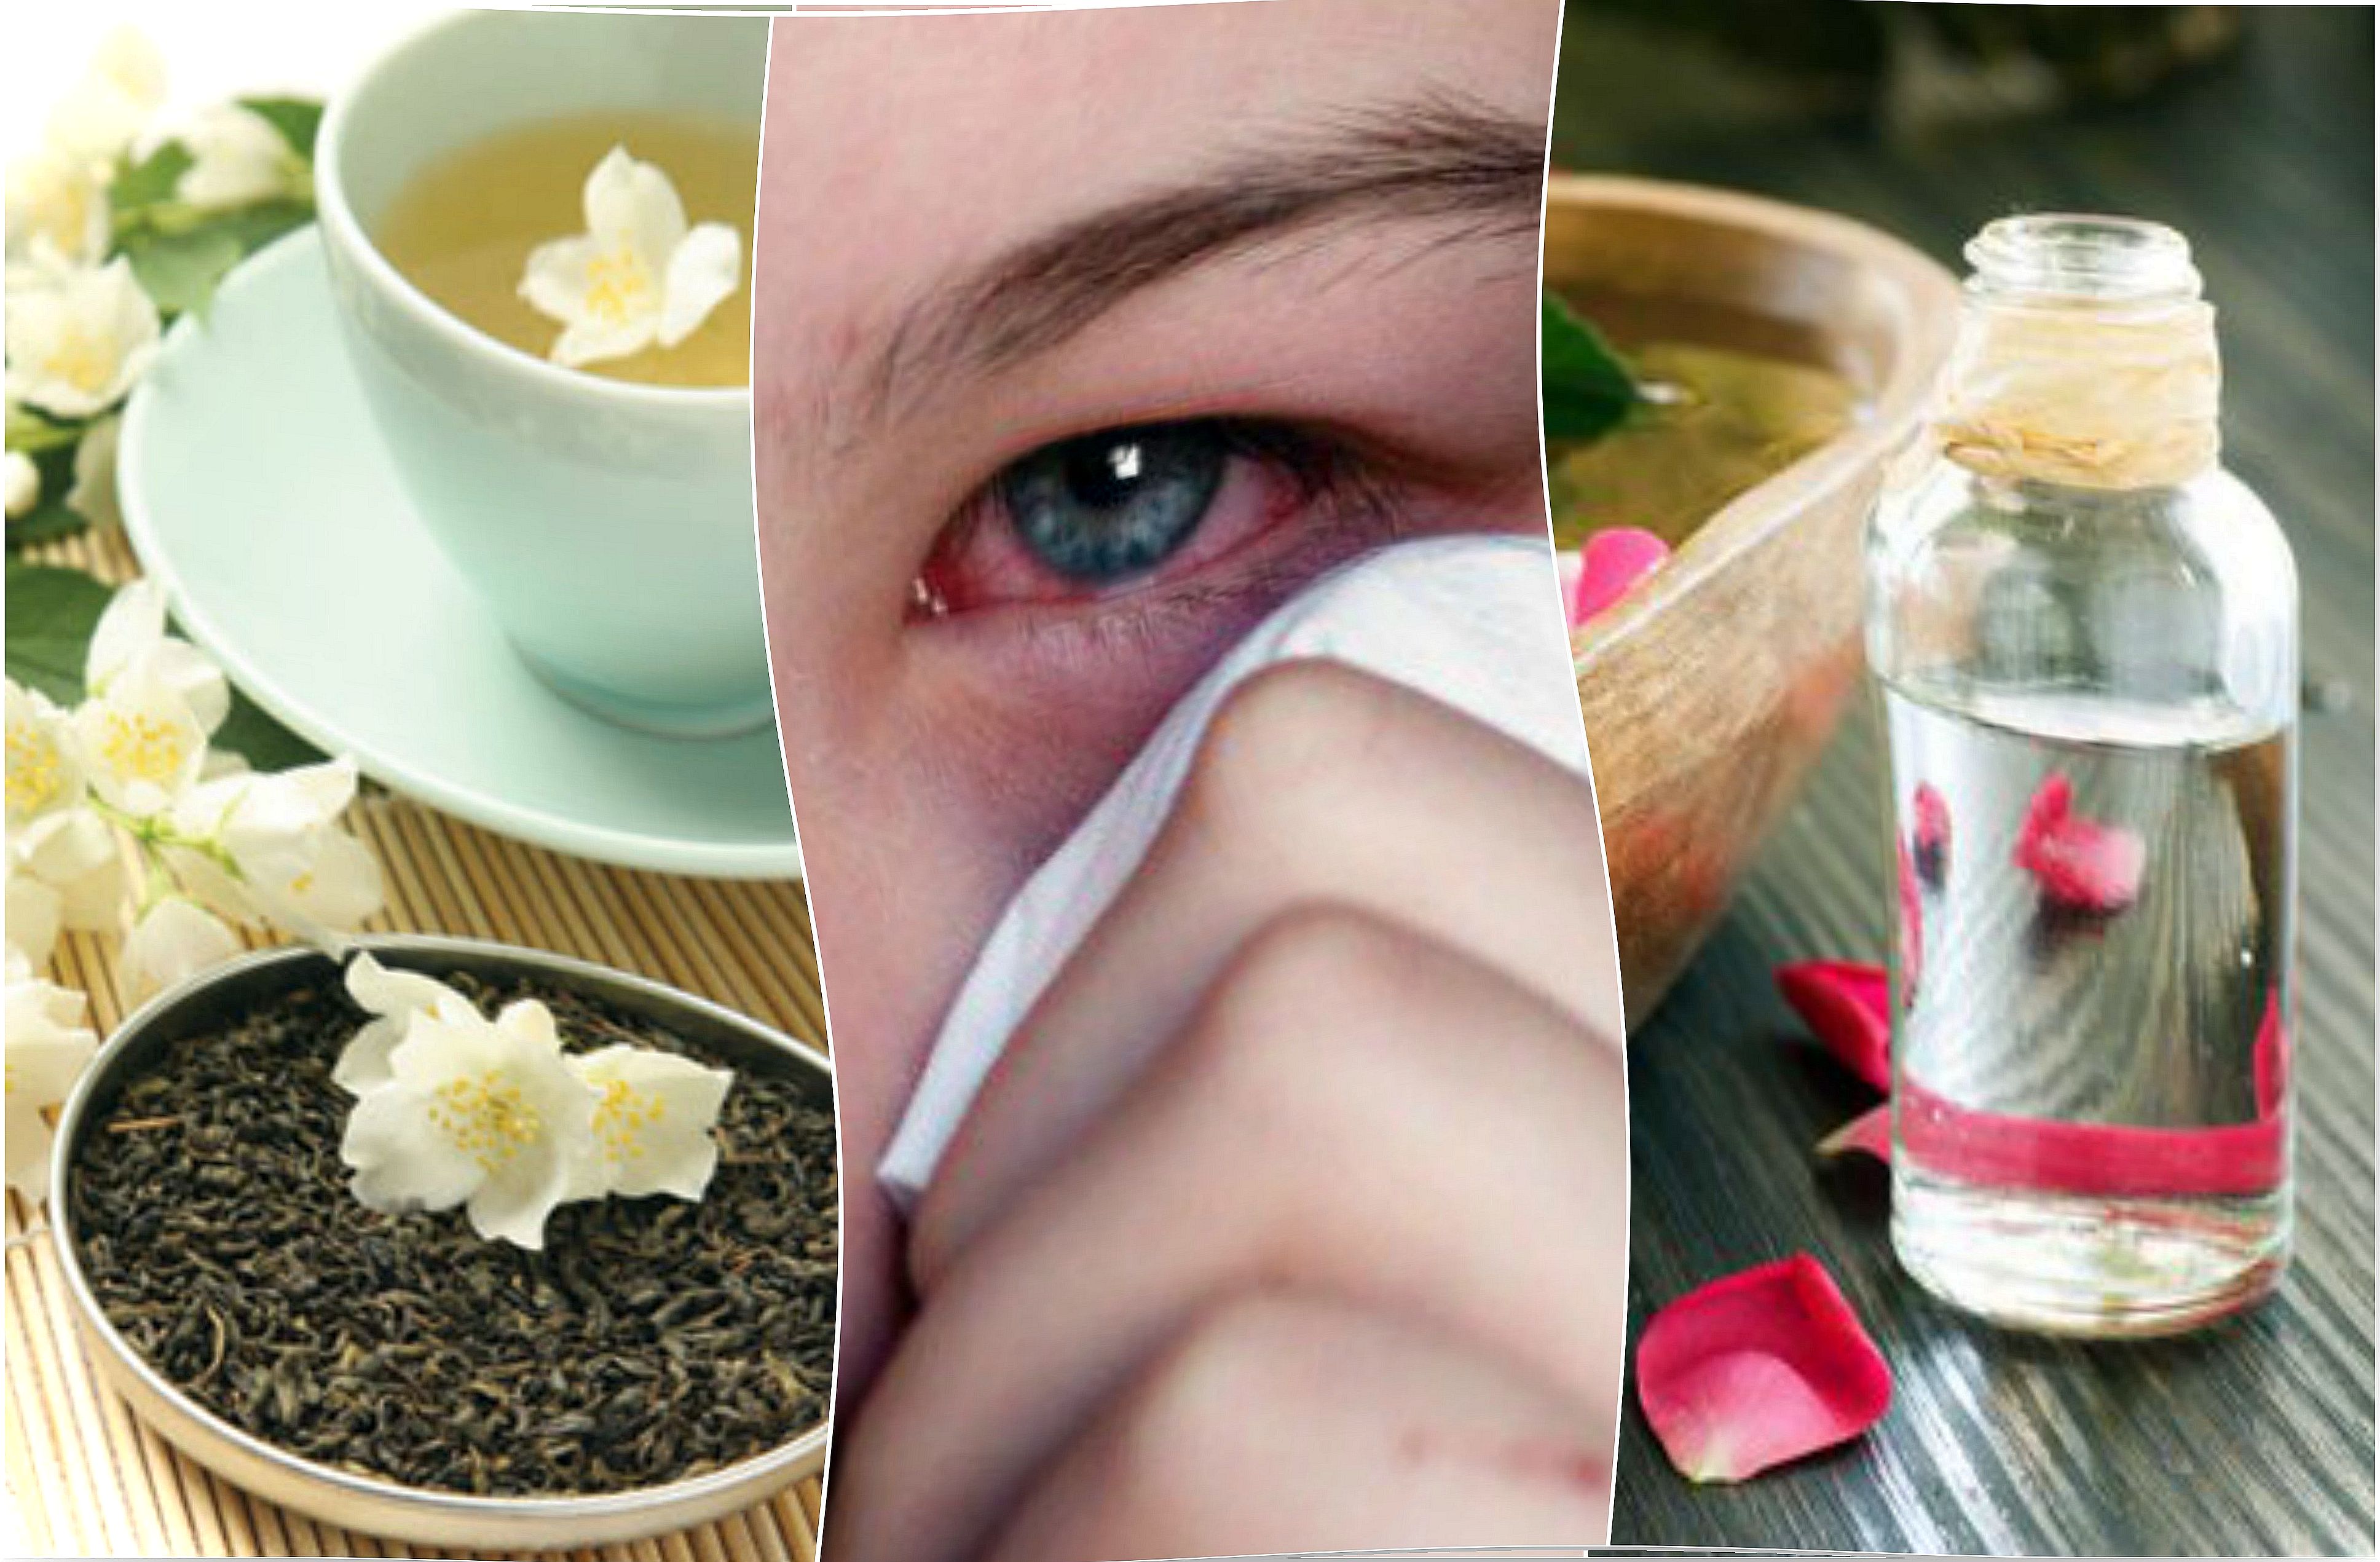 How to treat eye infections with 5 natural remedies